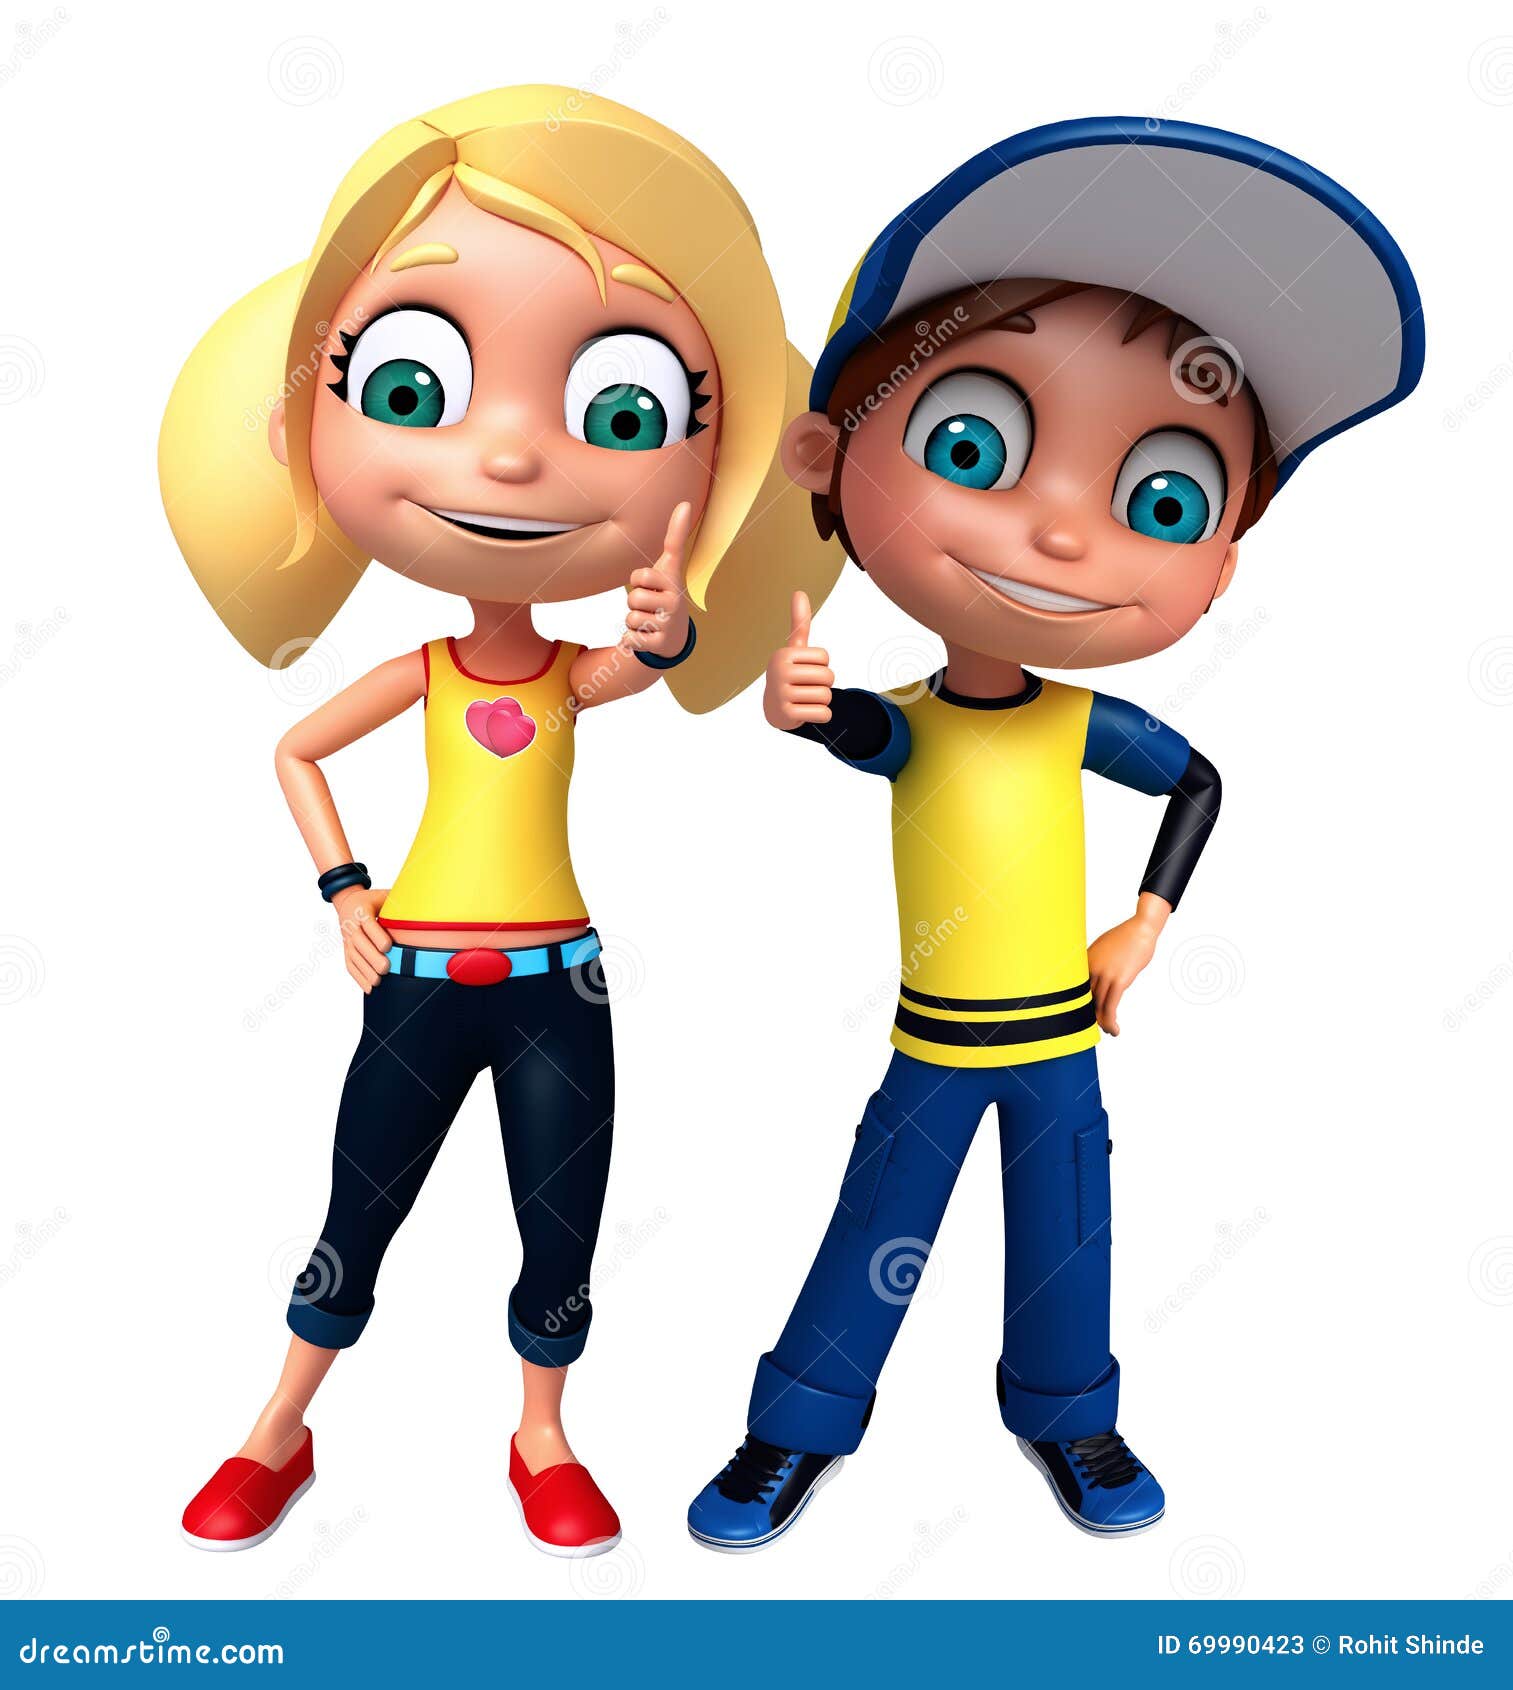 render of little boy and girl with thums up pose